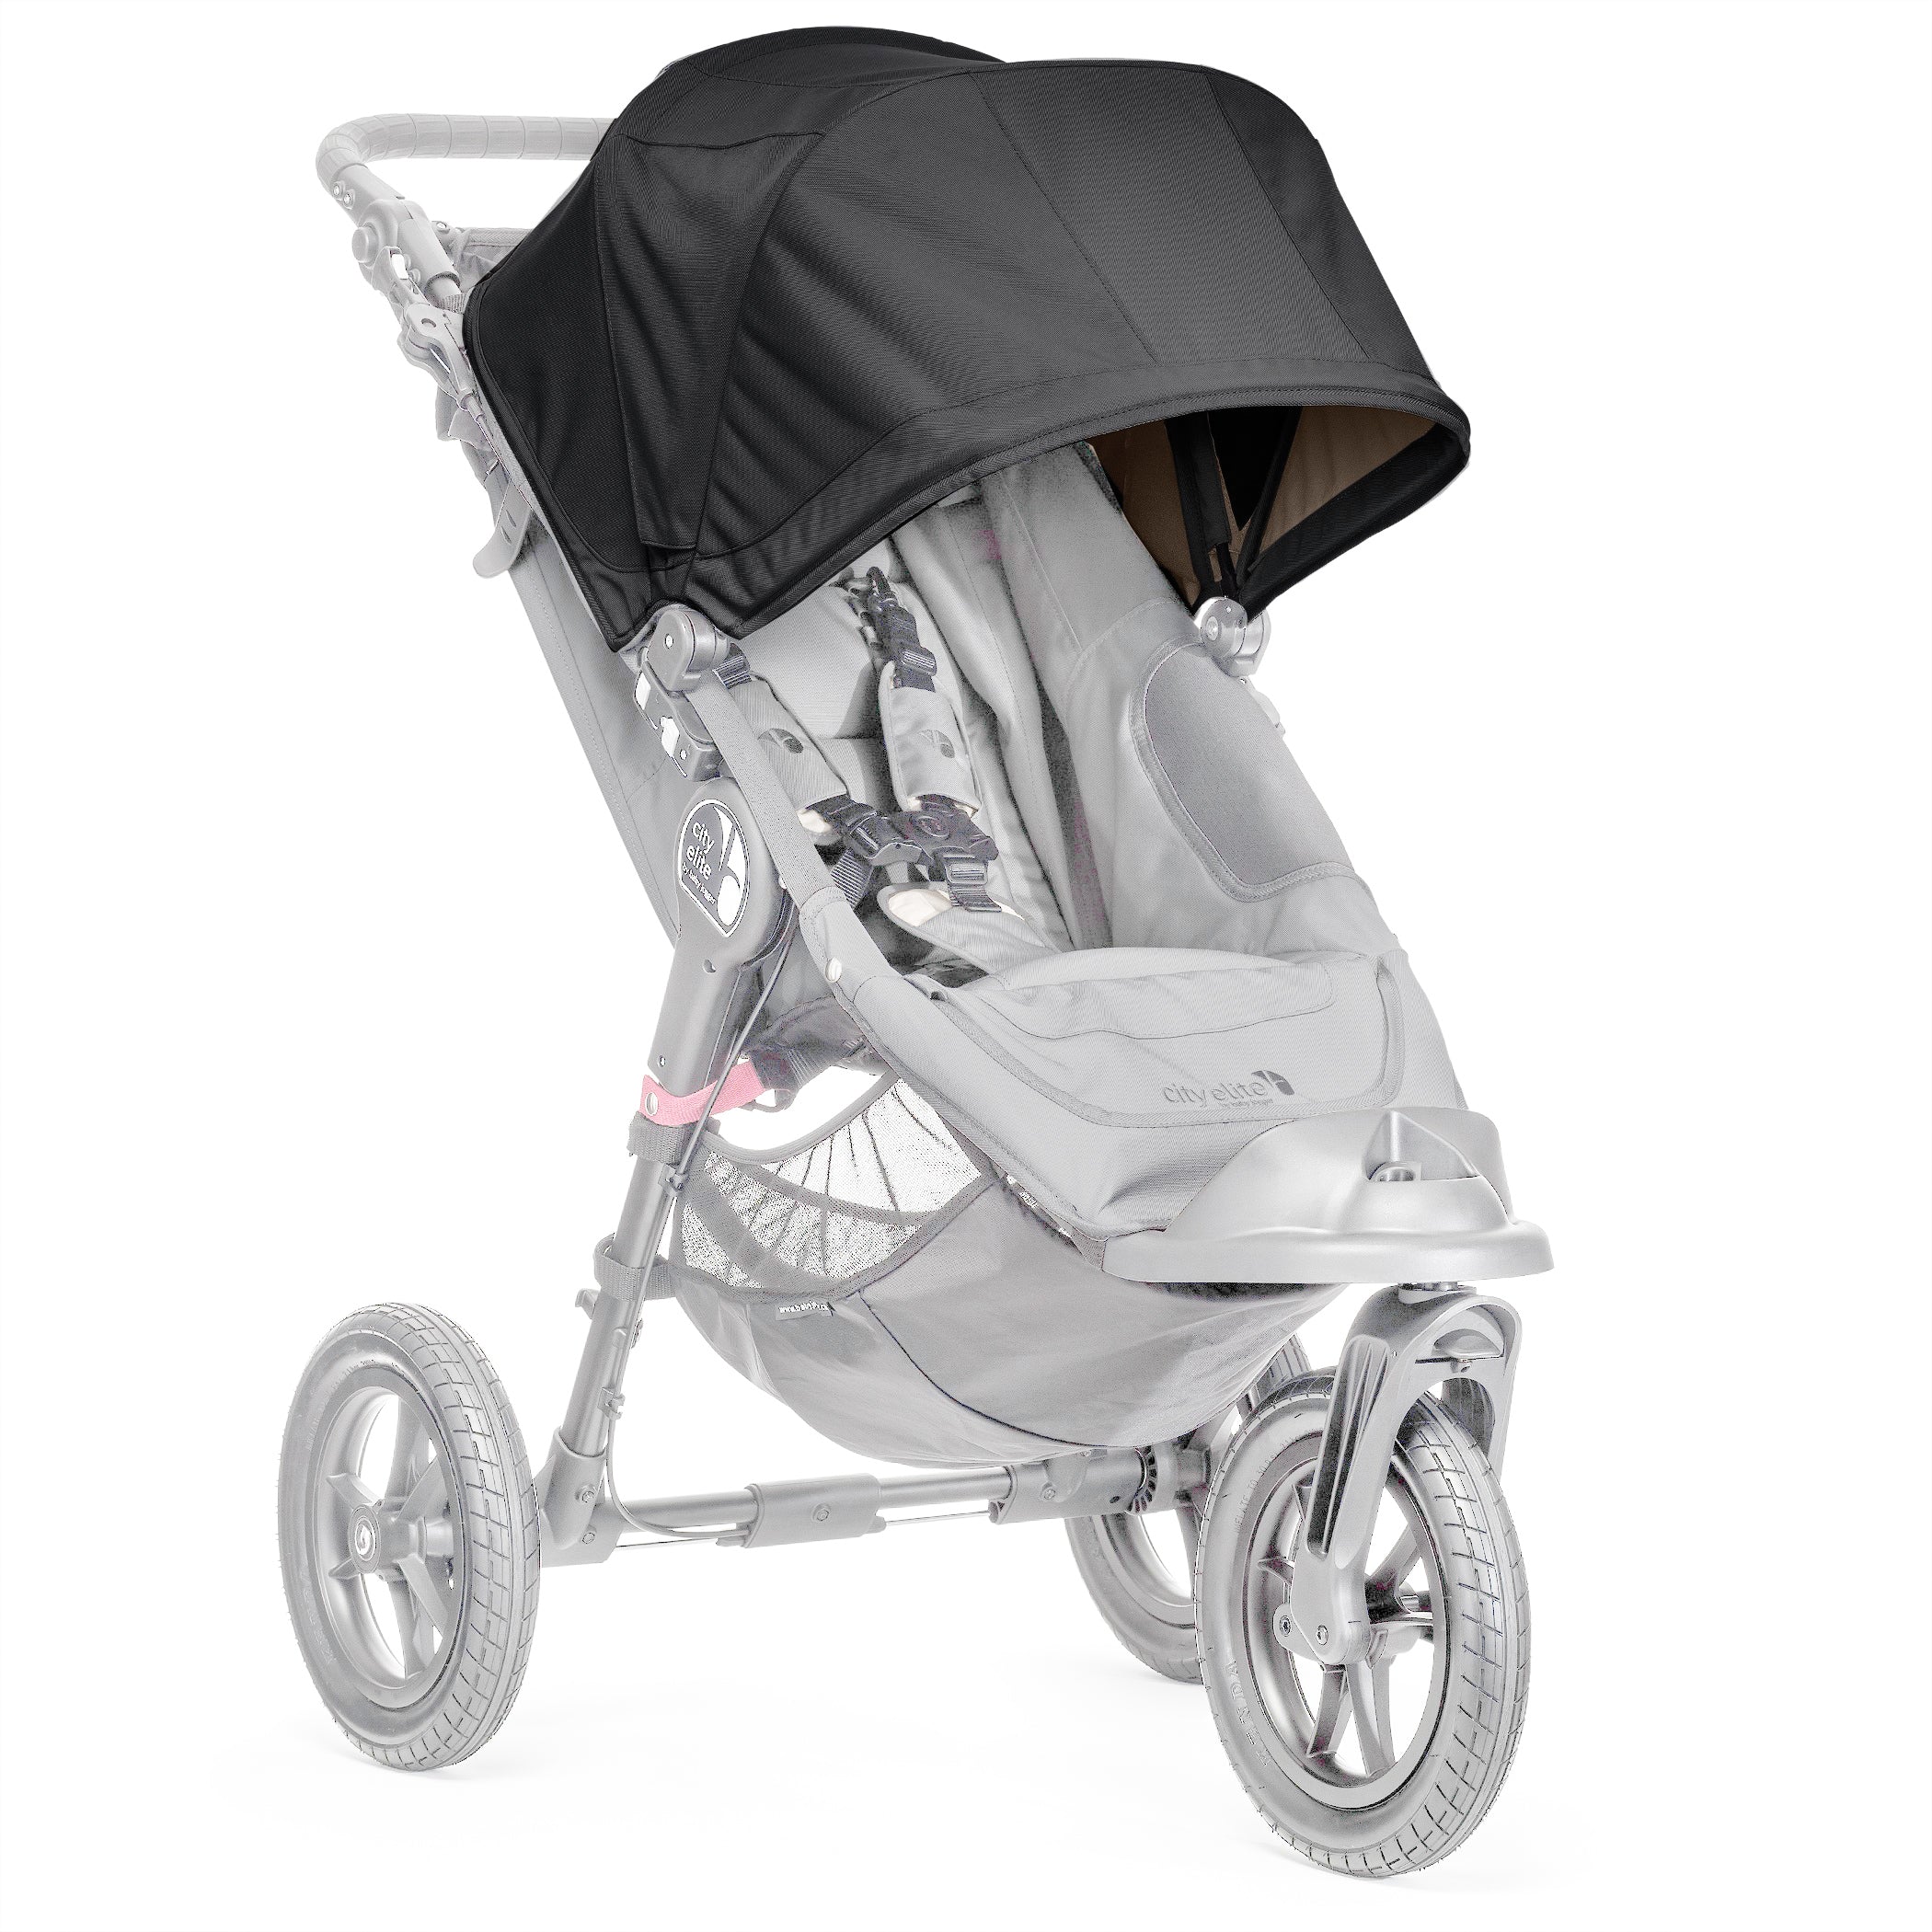 Baby Jogger reservedele